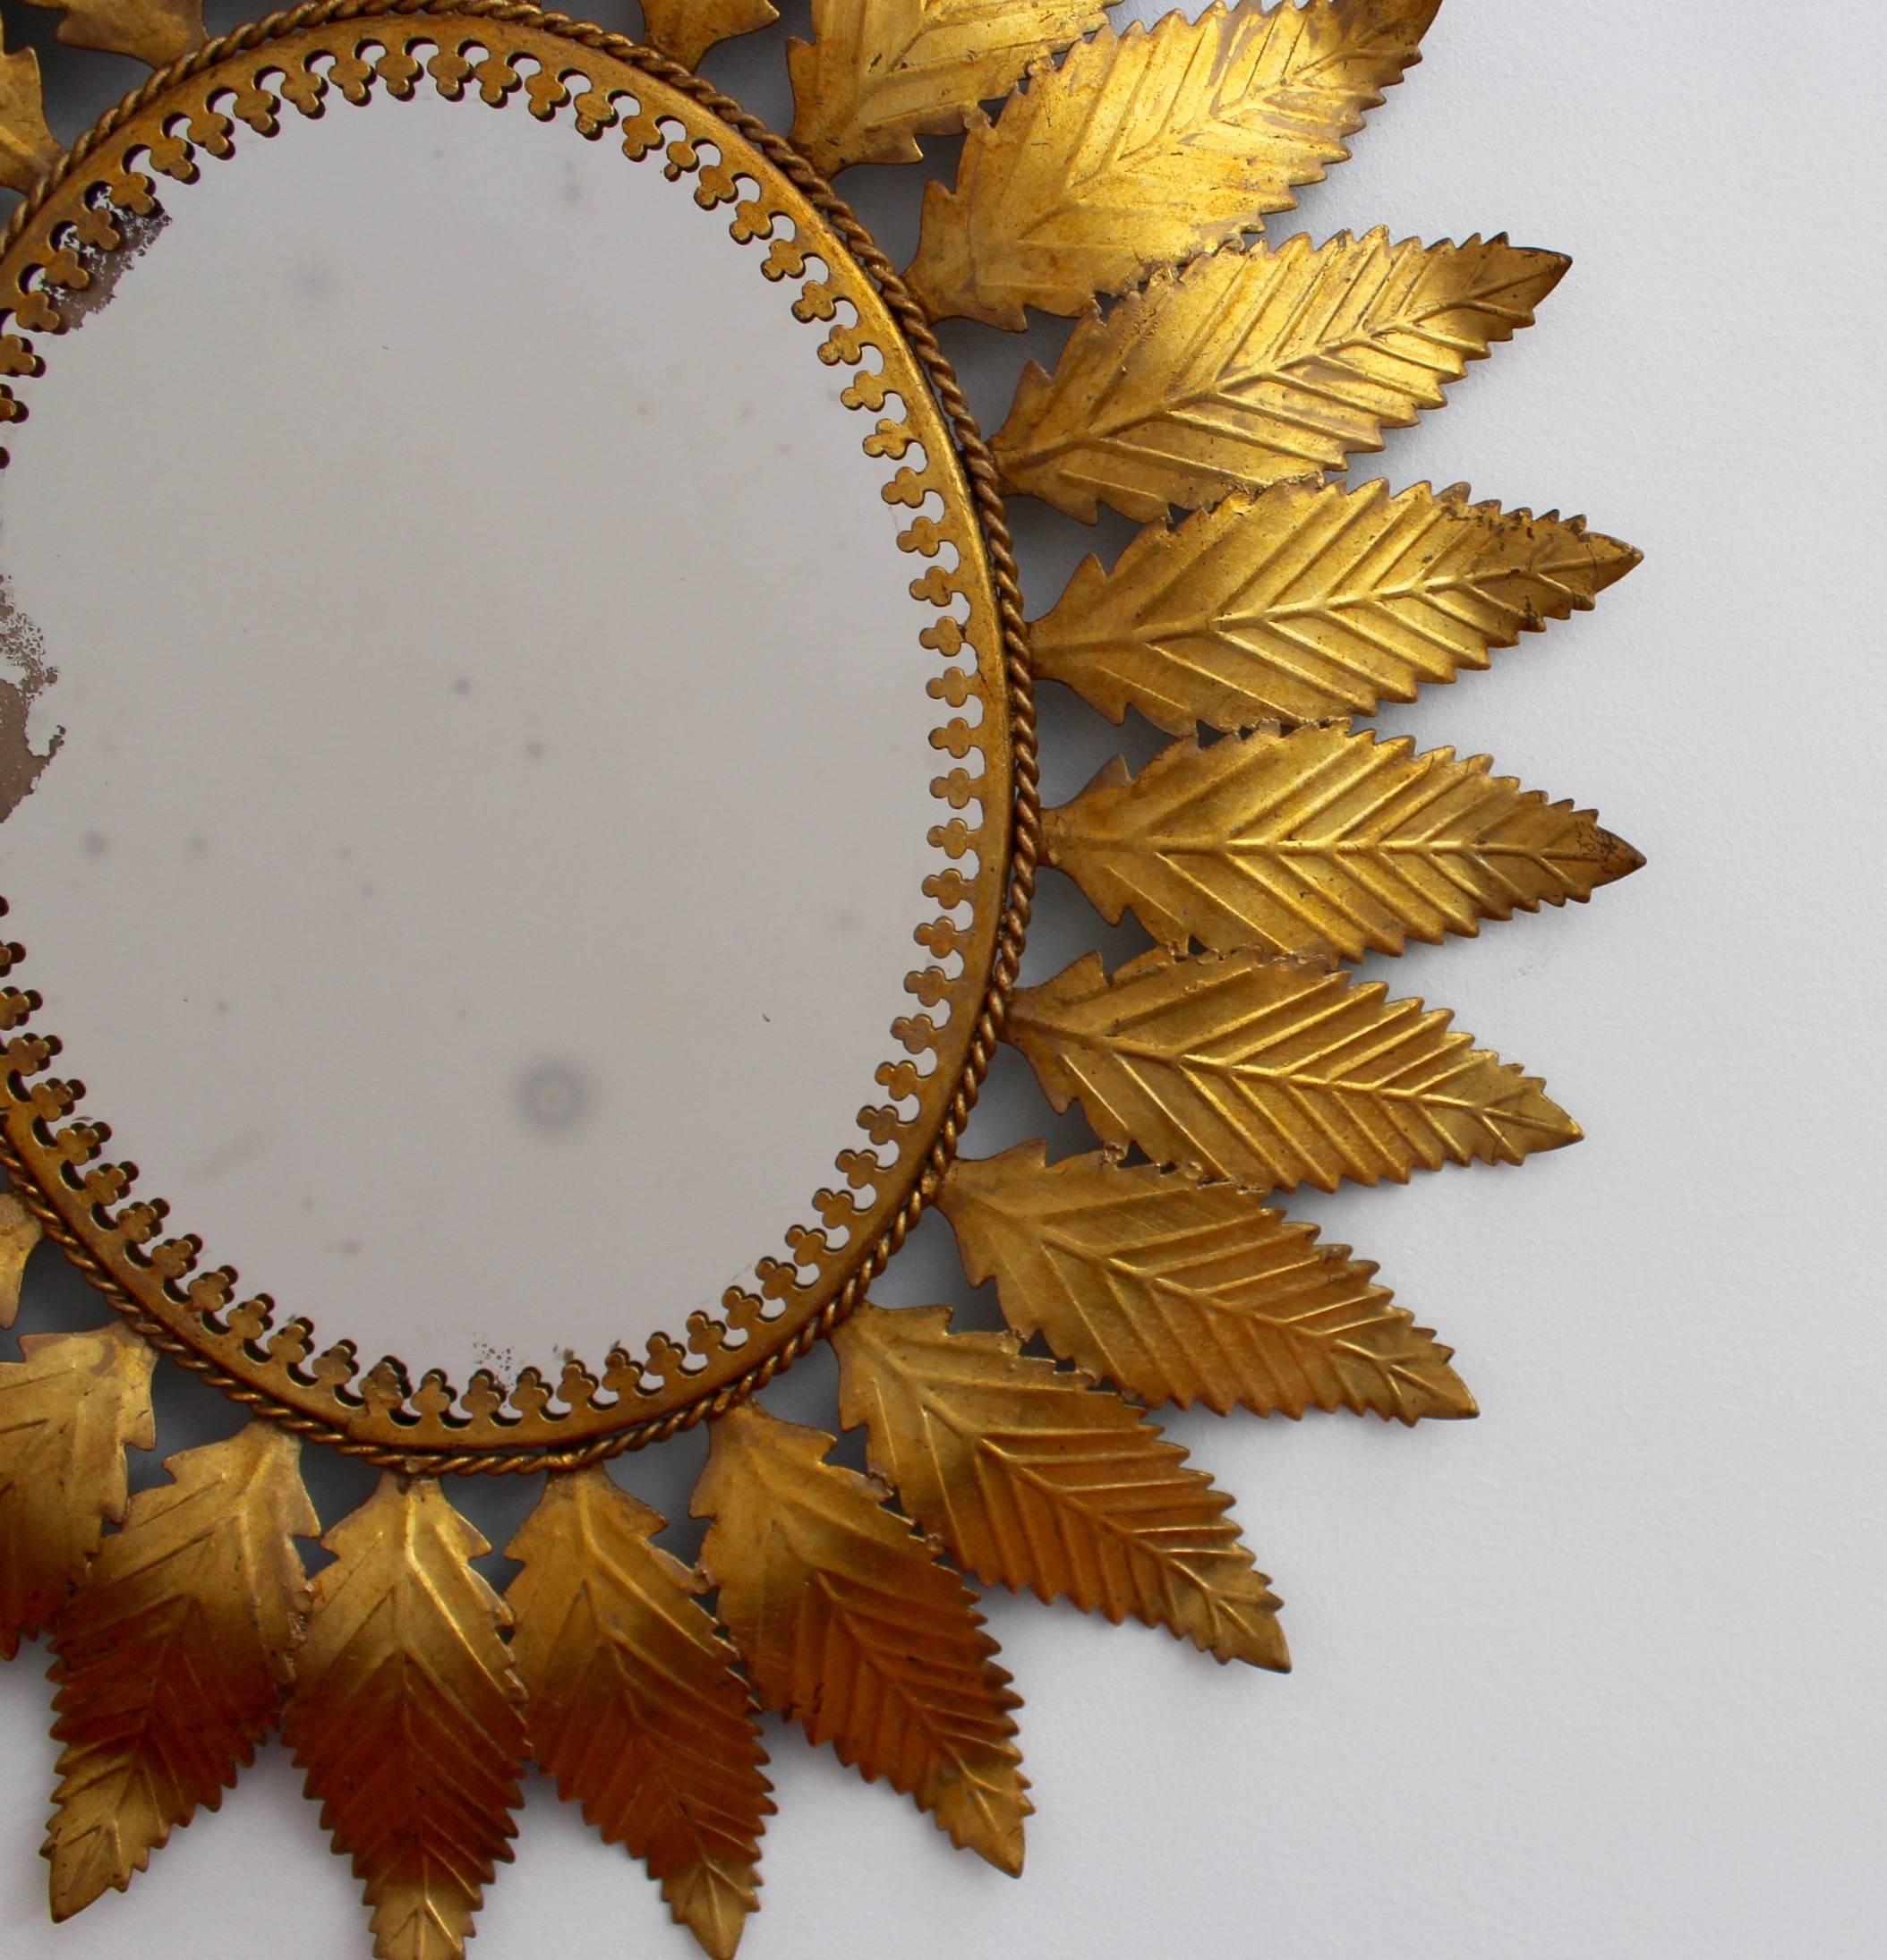 Spanish gilt metal sunburst mirror (circa 1950s) with leaf motif rays and cross-pattern mirror border. In fair vintage condition commensurate with age and use. Some authentic age spots, blemishes and degradation appear on mirror surface reflecting